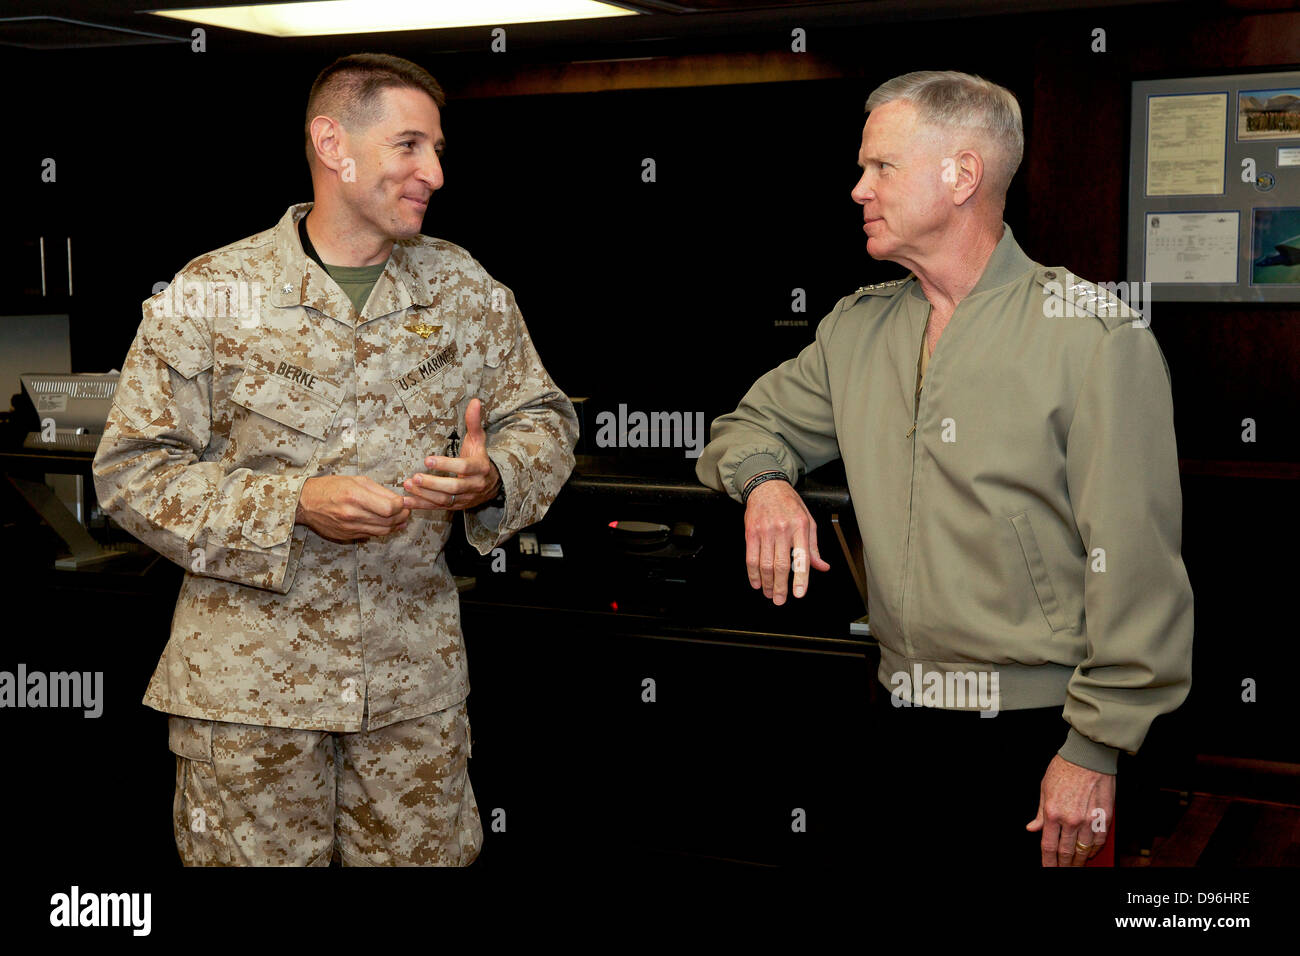 The 35th commandant of the Marine Corps, General James F. Amos, right, speaks with Lt. Col. David R. Berke while visiting the Marine Fighter Attack Training Squadron 501 (VMFAT-501) at Eglin Air Force Base, FL, May 4, 2013. VMFAT-501 is a newly reactivate Stock Photo